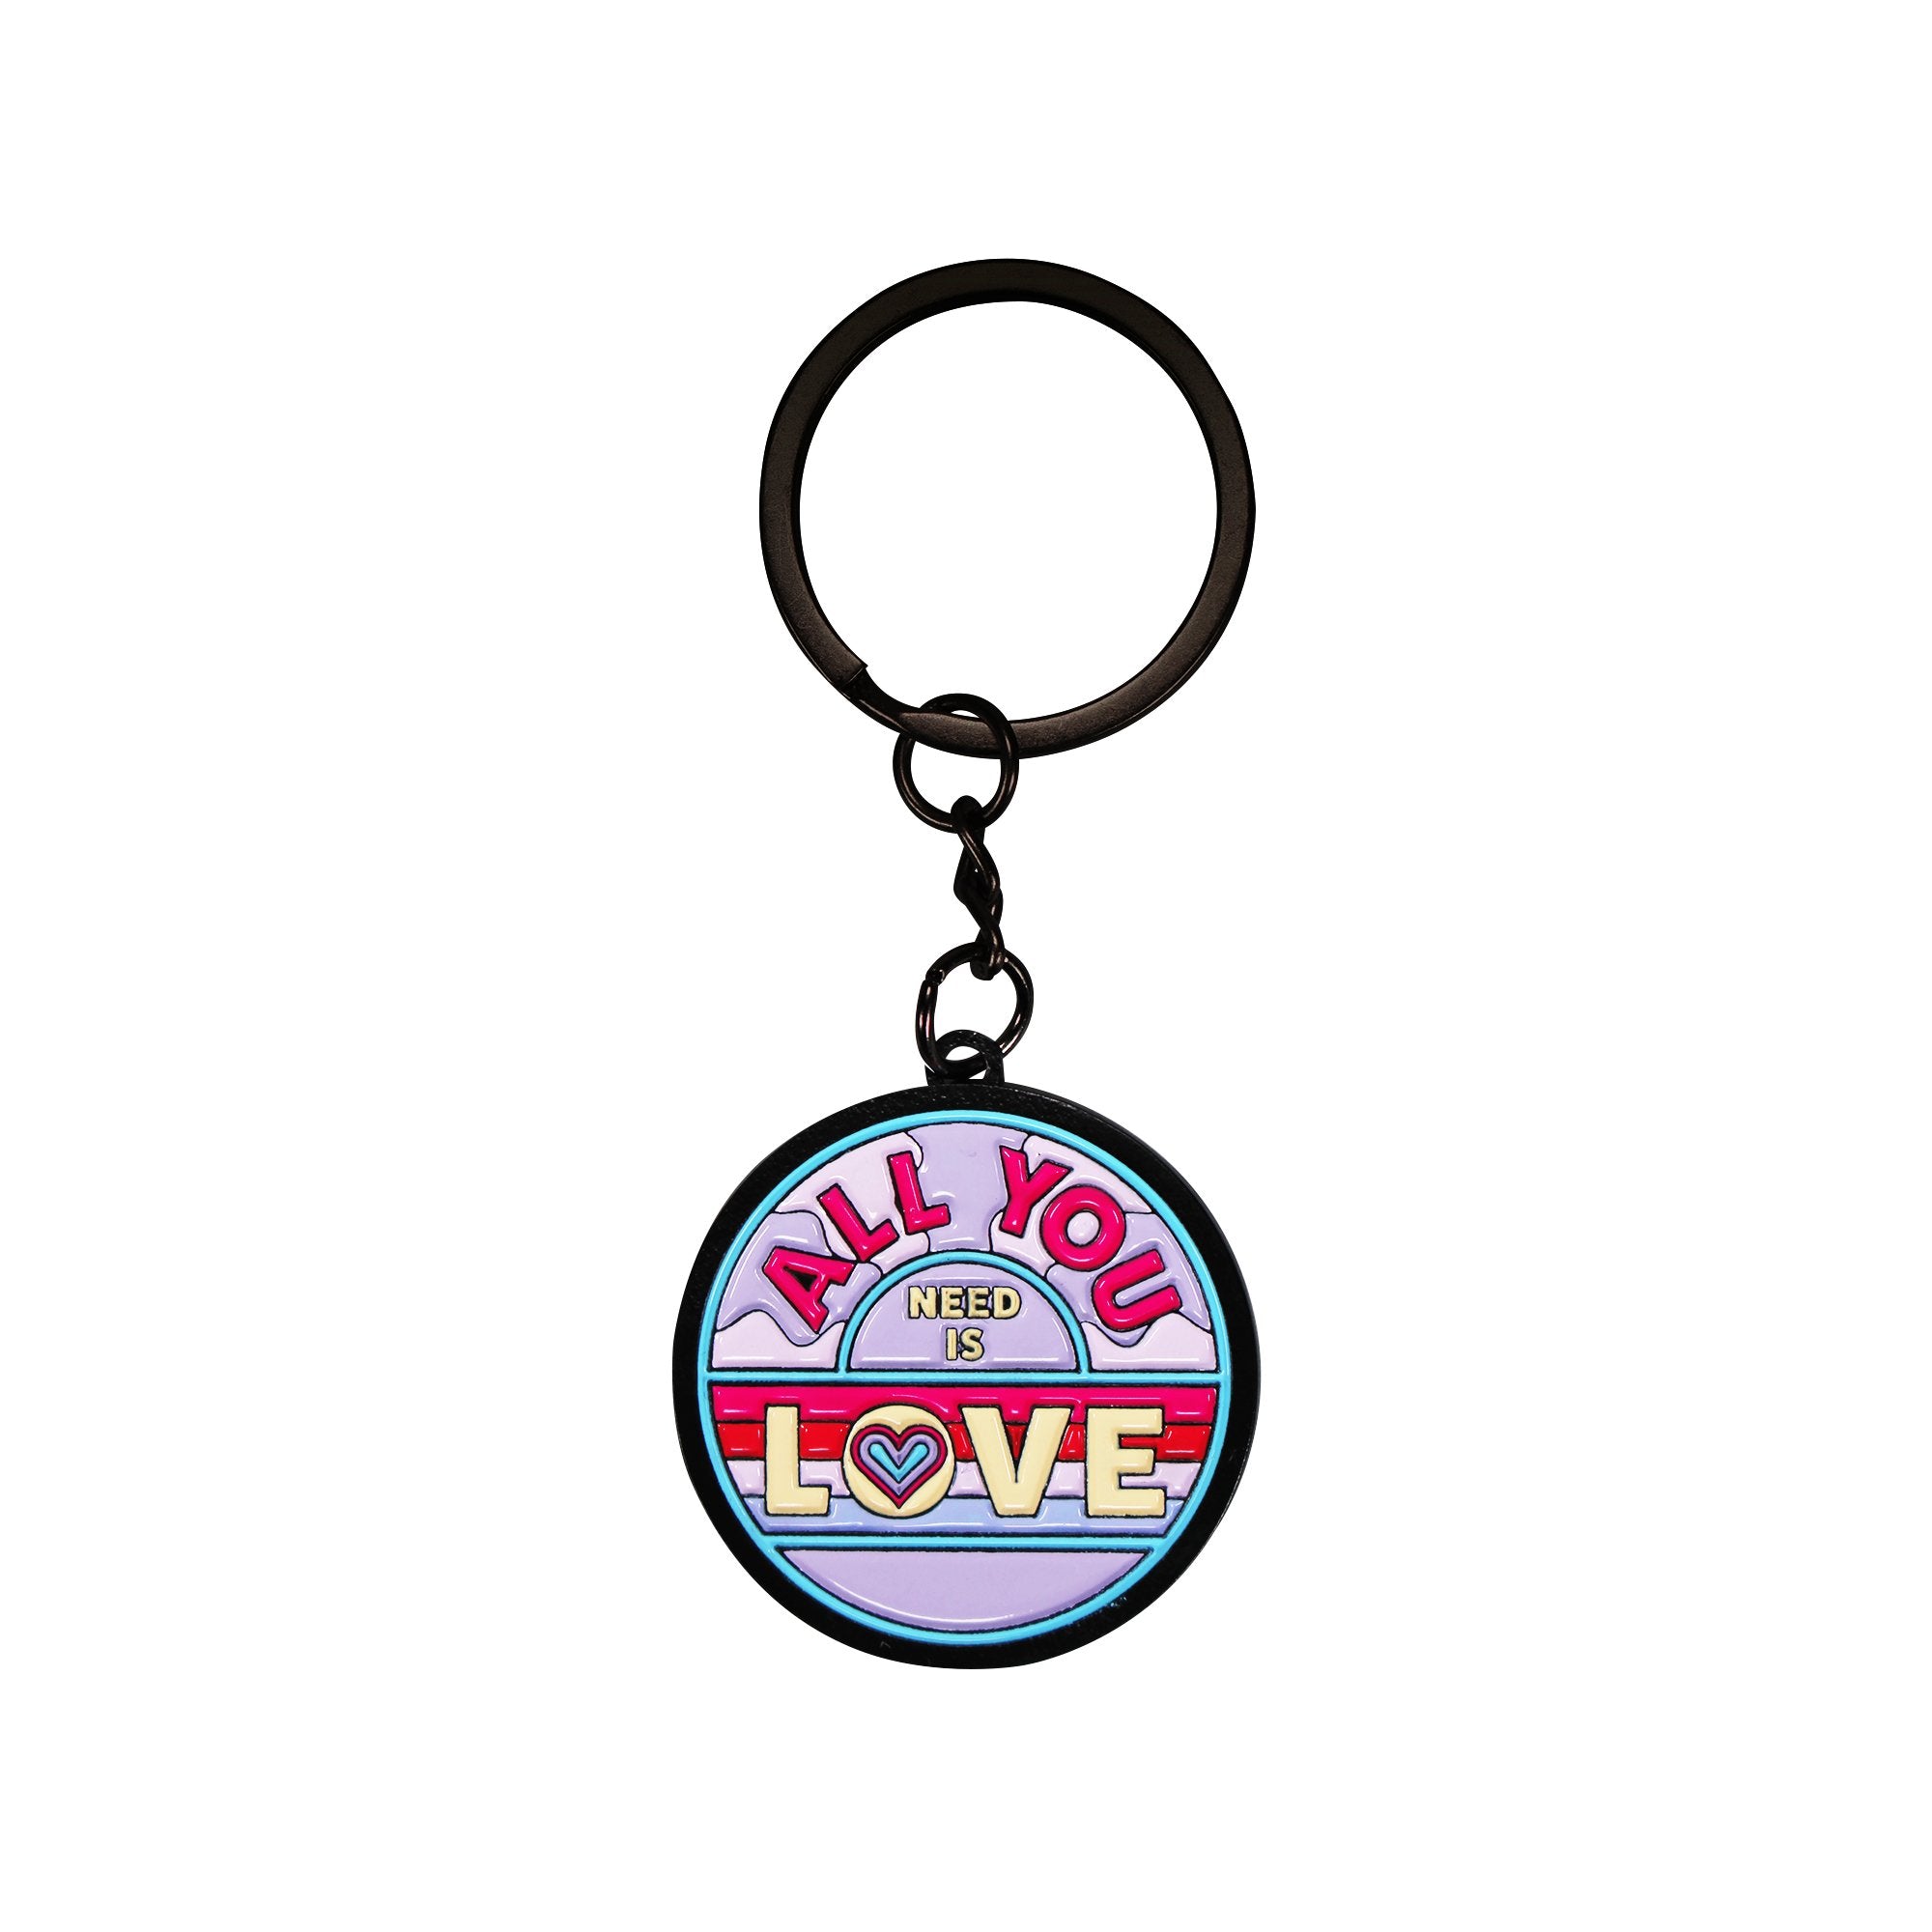 Keyring Metal - The Beatles (All You Need is Love)